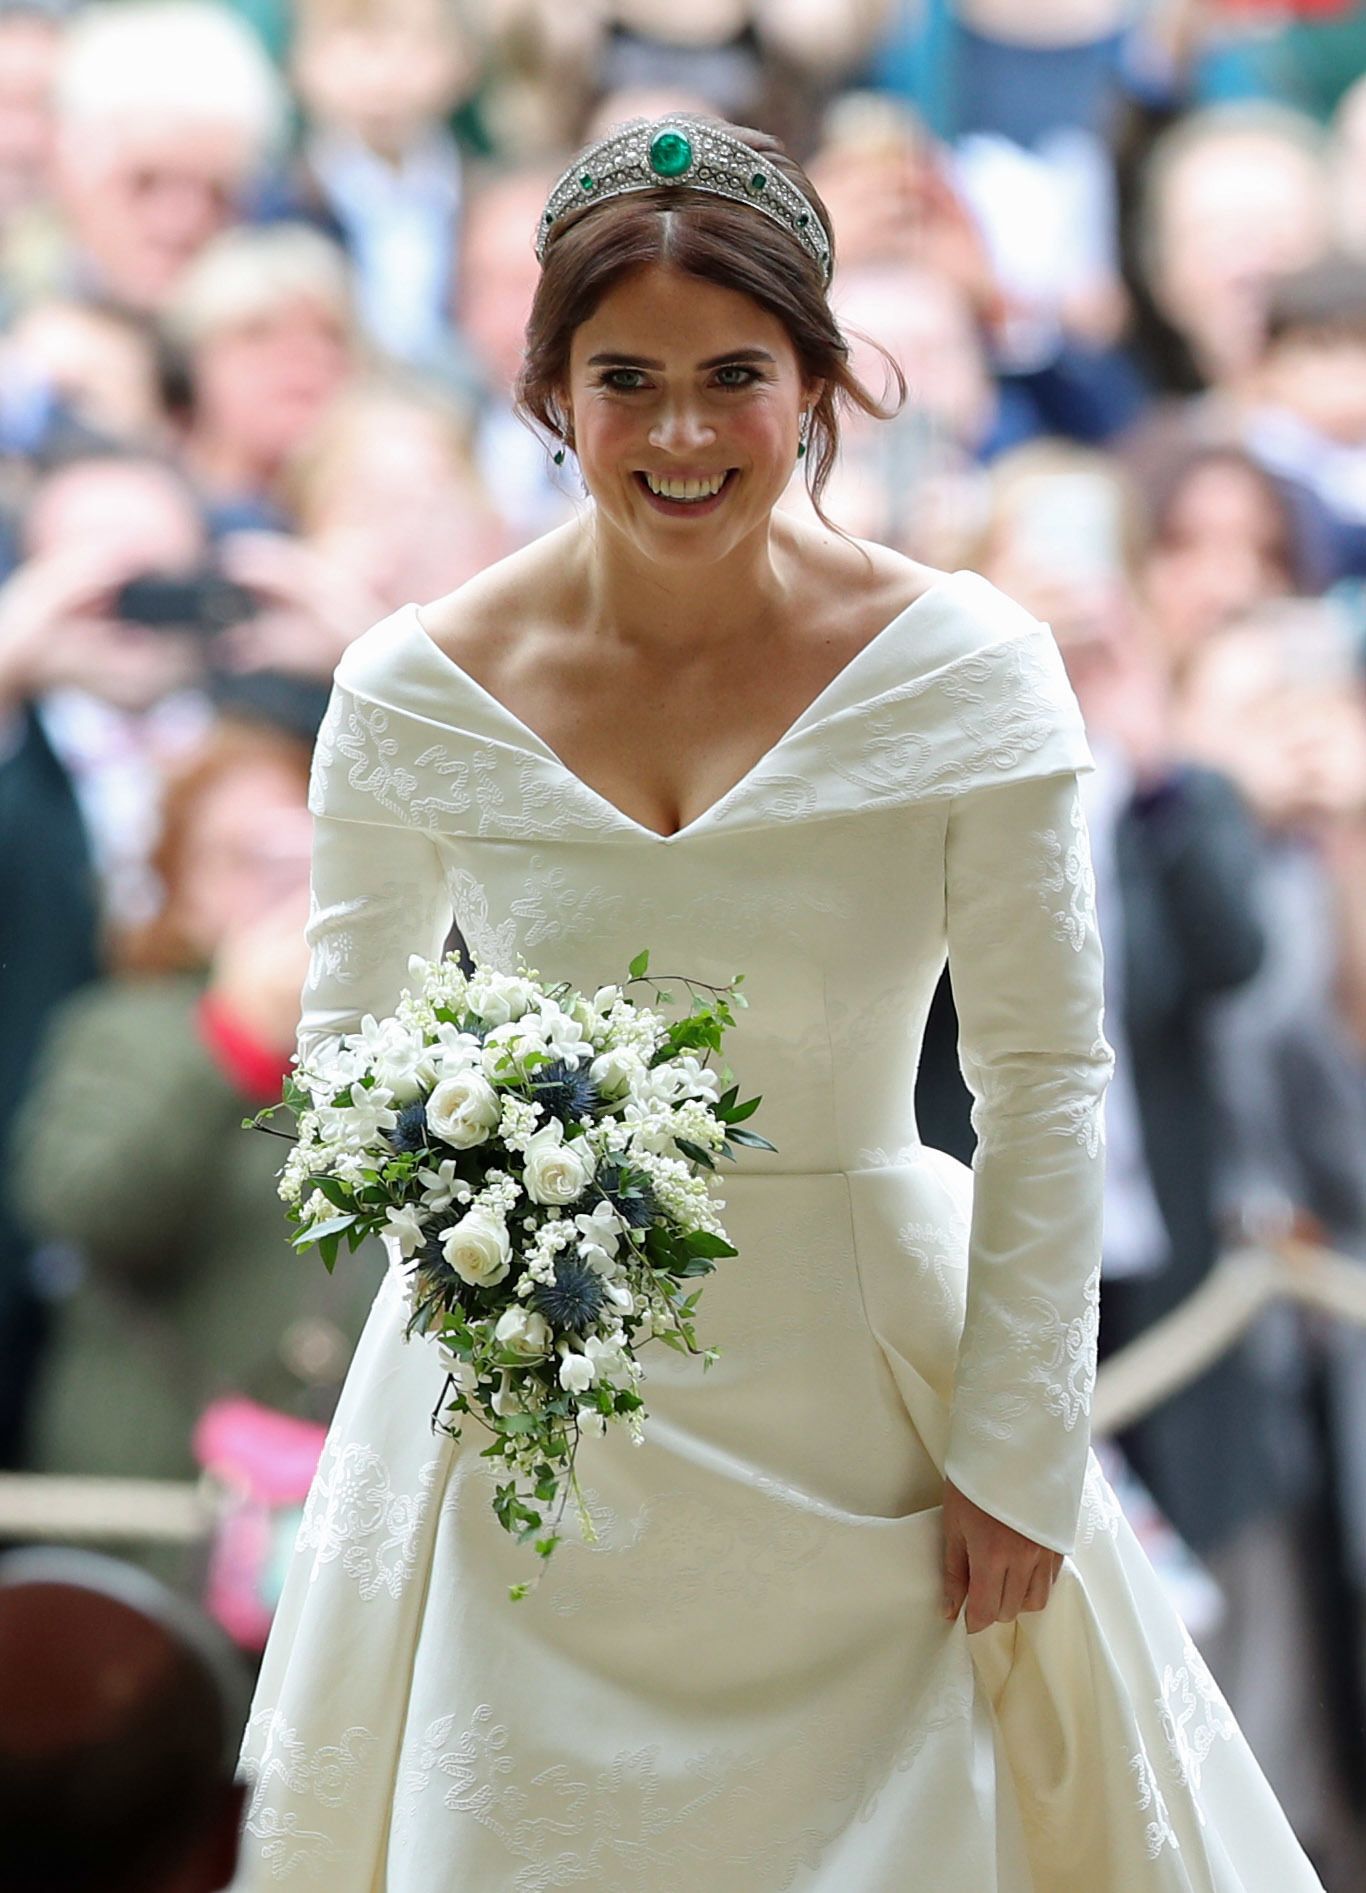 How Meghan Markle's Wedding Dress Will Influence What Brides Wear - Racked